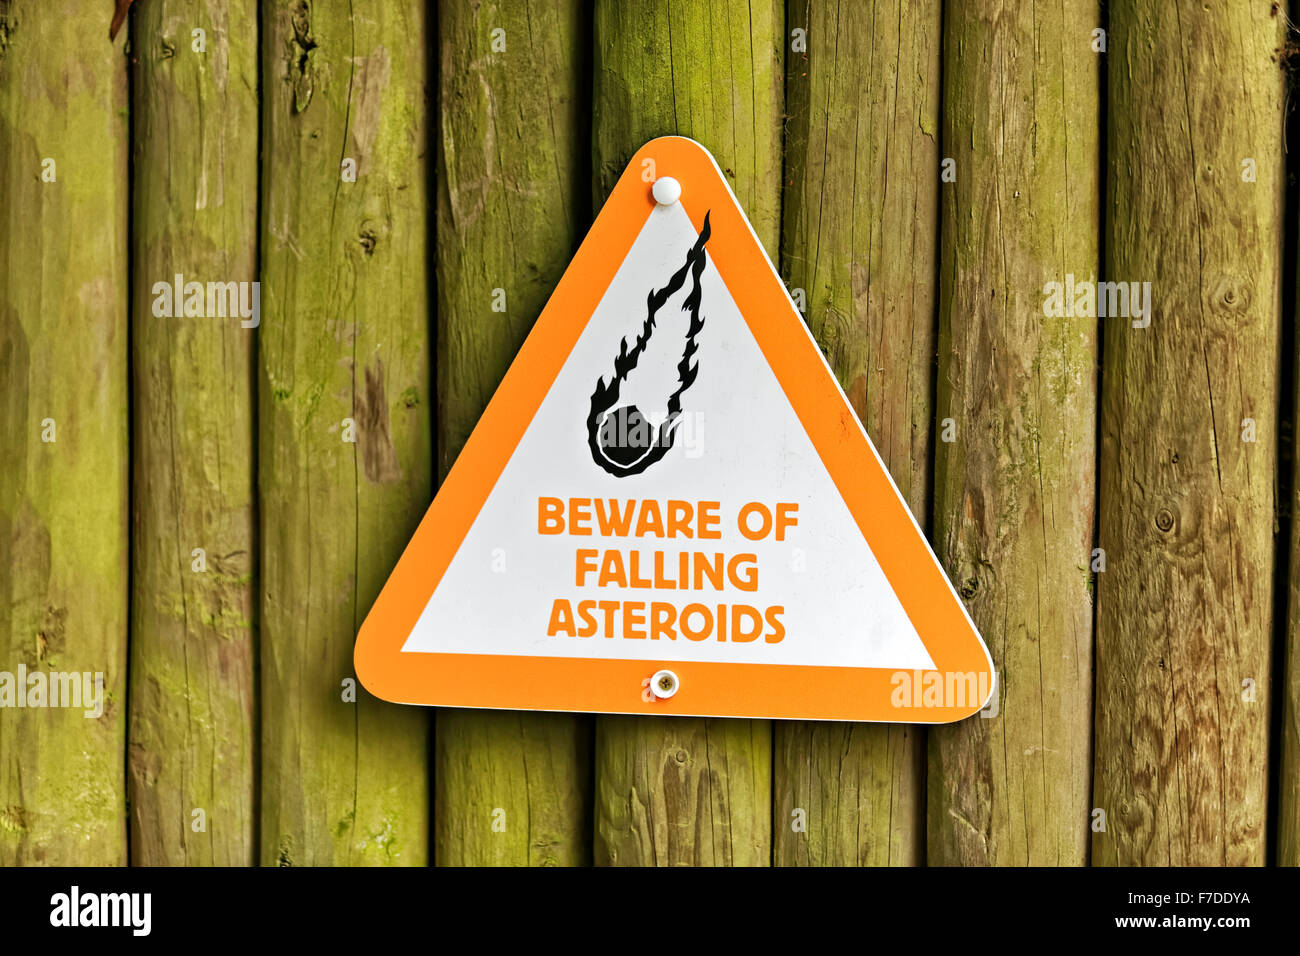 Asteroids Stock Photos & Asteroids Stock Images - Alamy1300 x 956